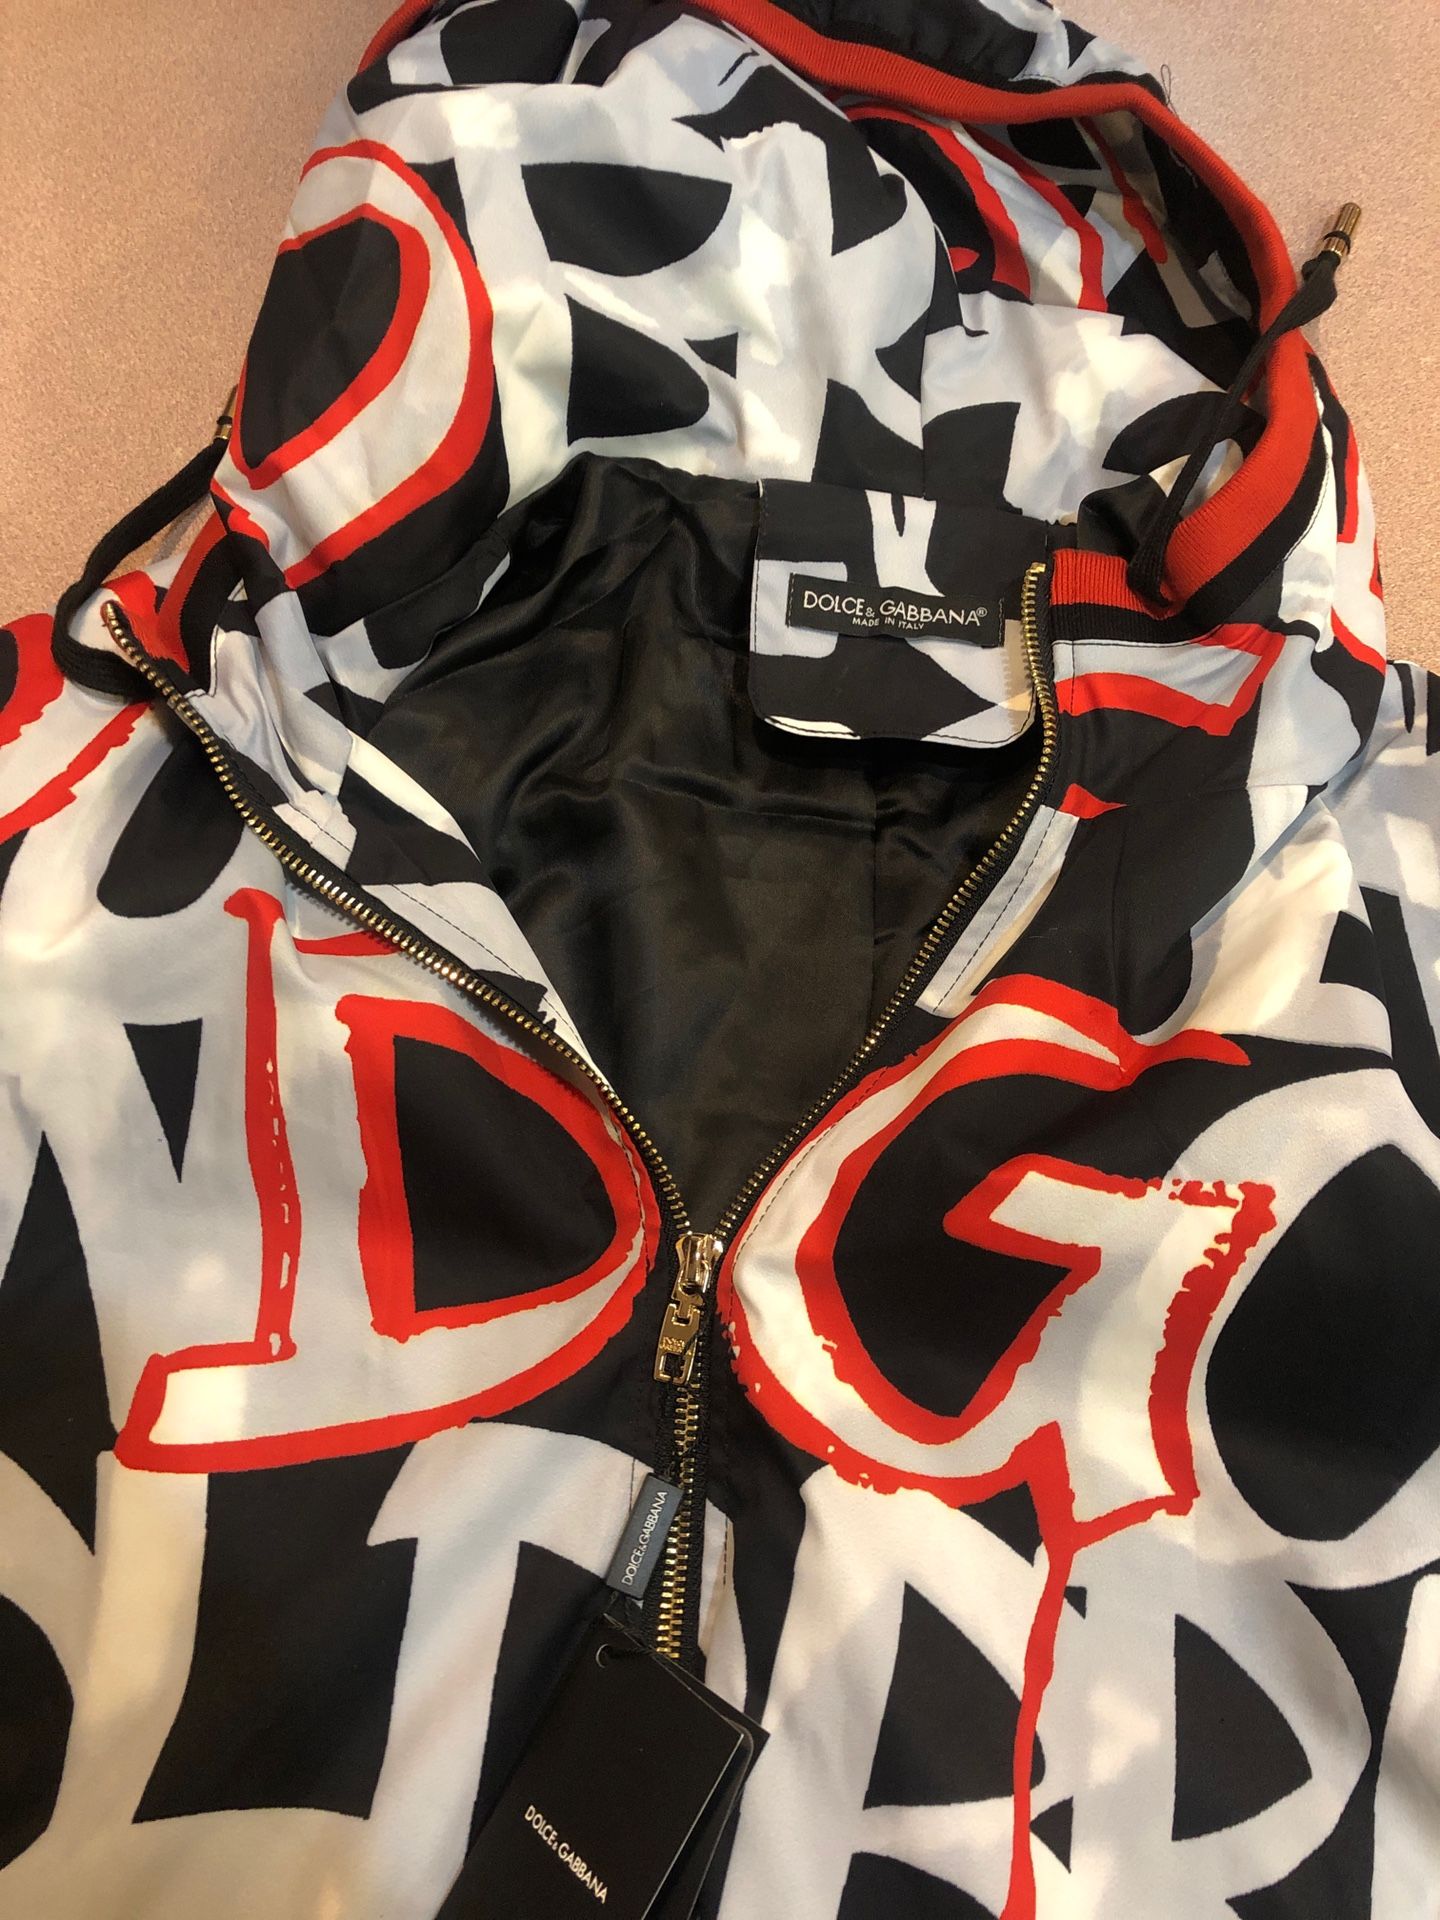 Official D&G hoodie jacket serious inquires 600$🏷🔥🔥🔥